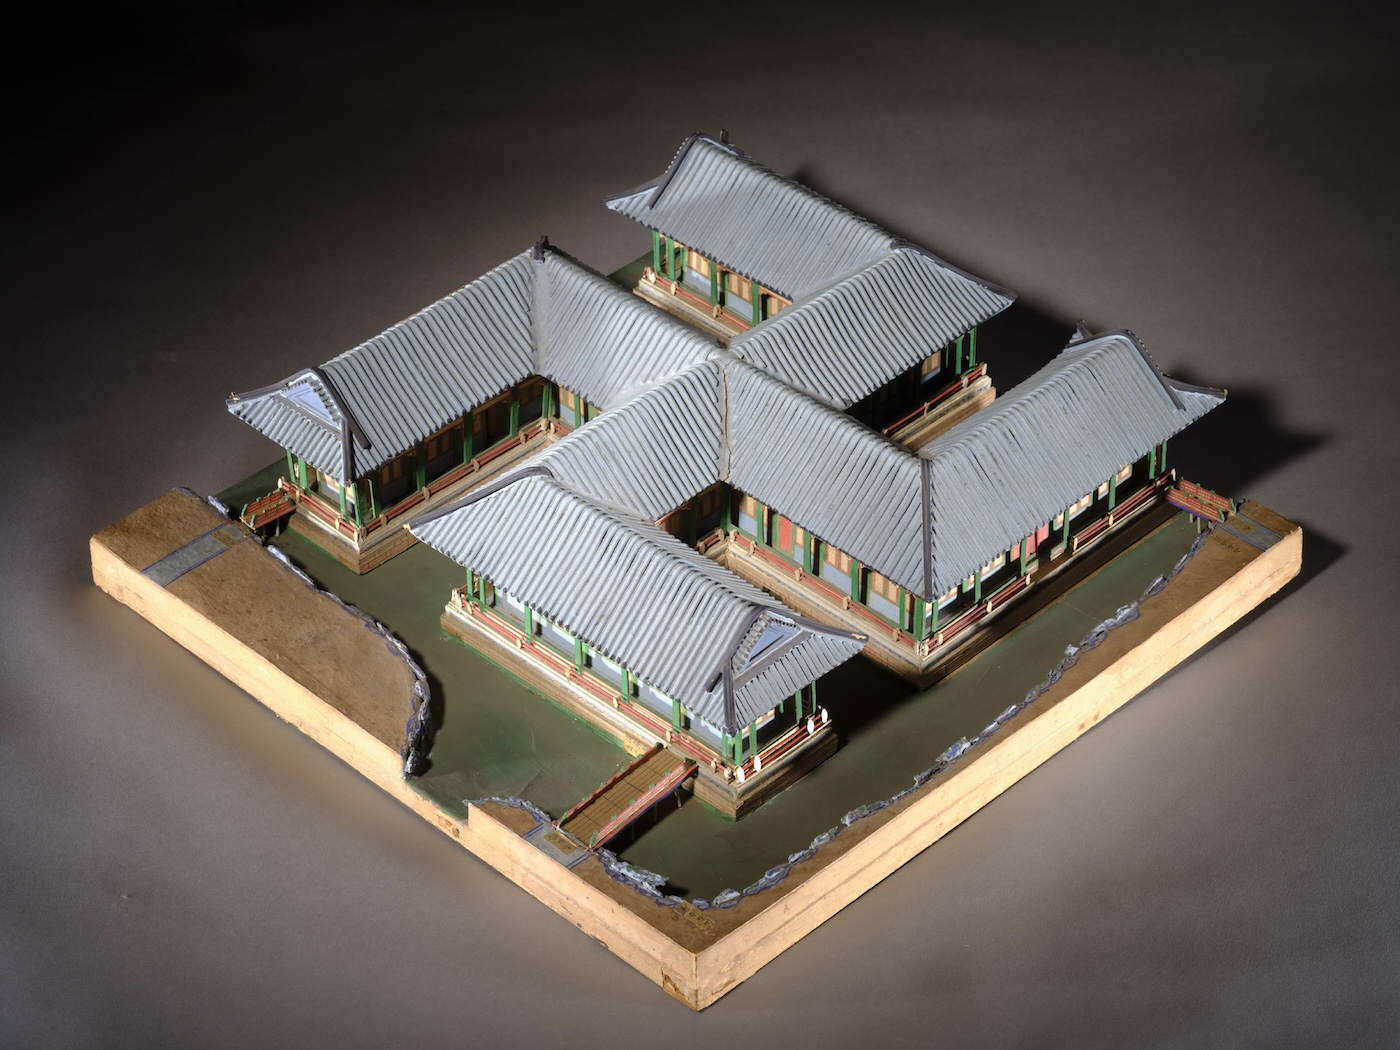 Model of the Hall of Universal Peace in Yuanming yuan